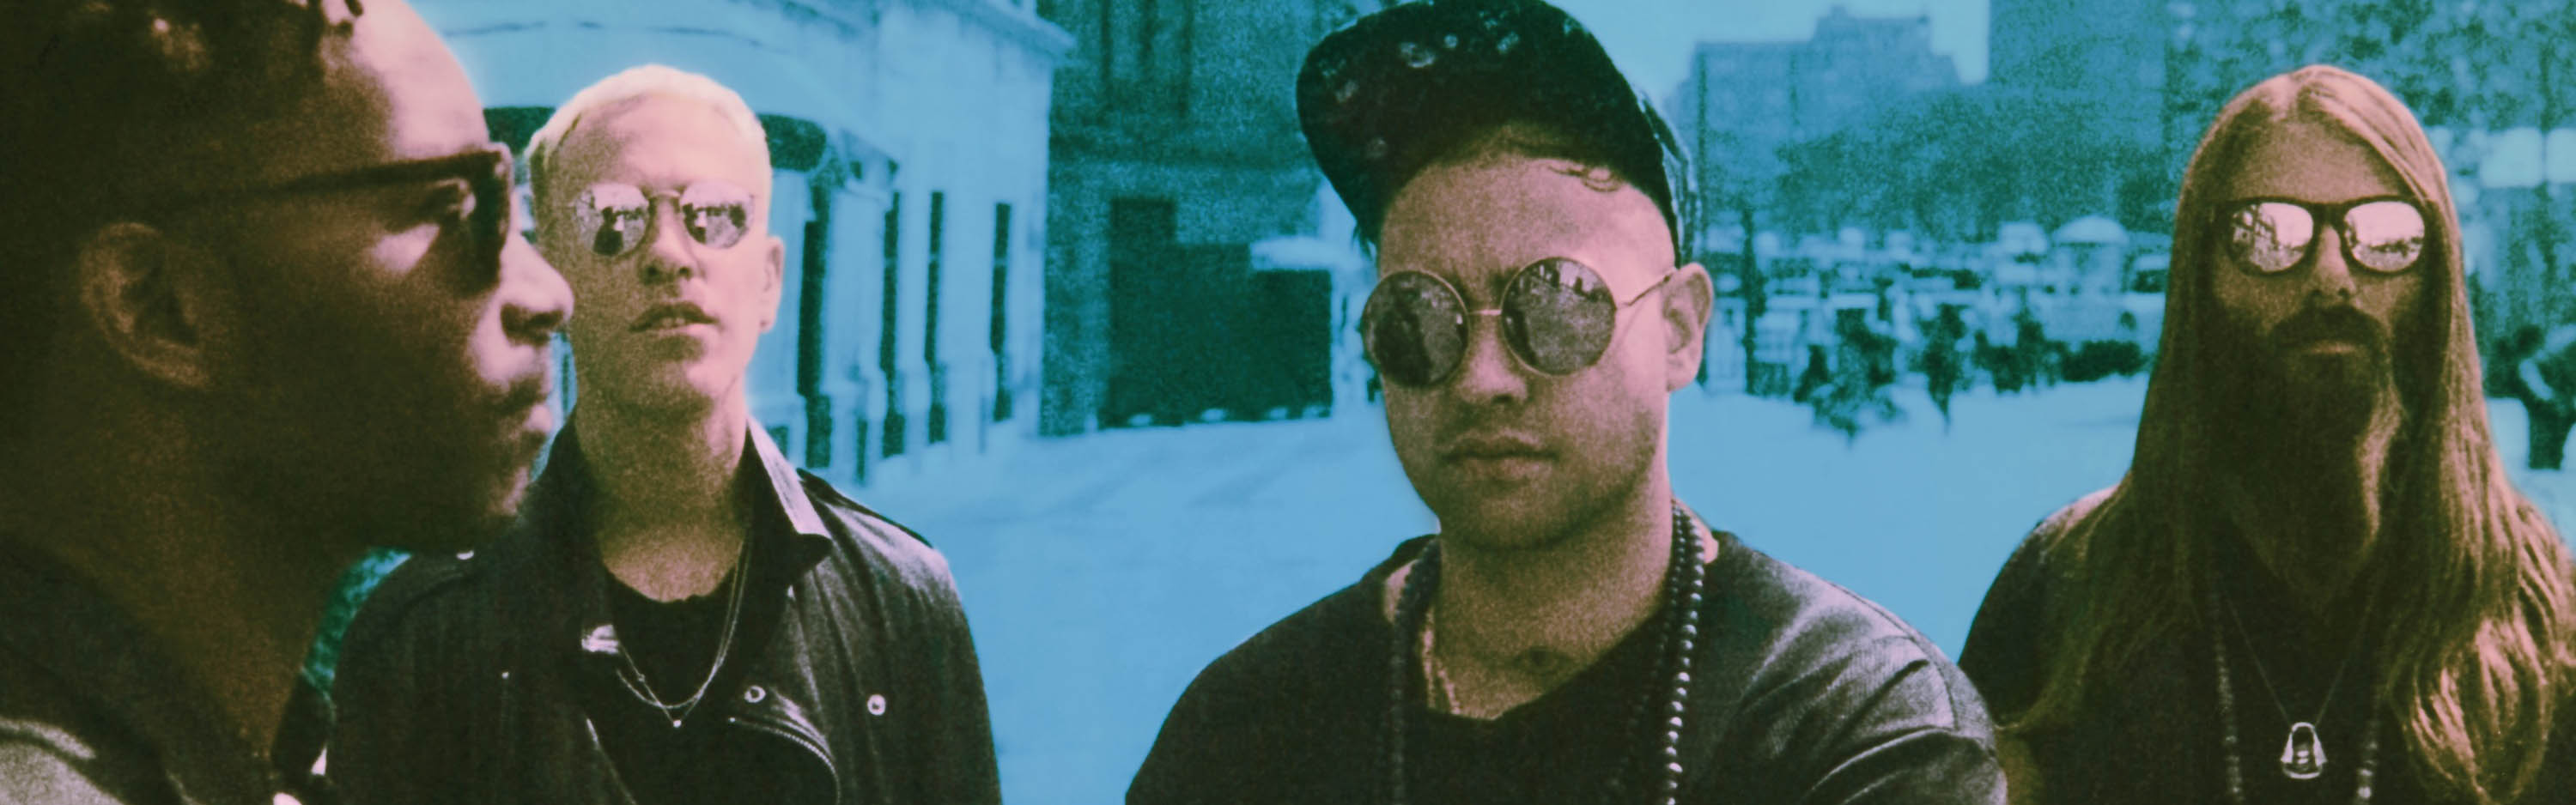 UNKNOWN MORTAL ORCHESTRA_Photo Credit Neil Krug